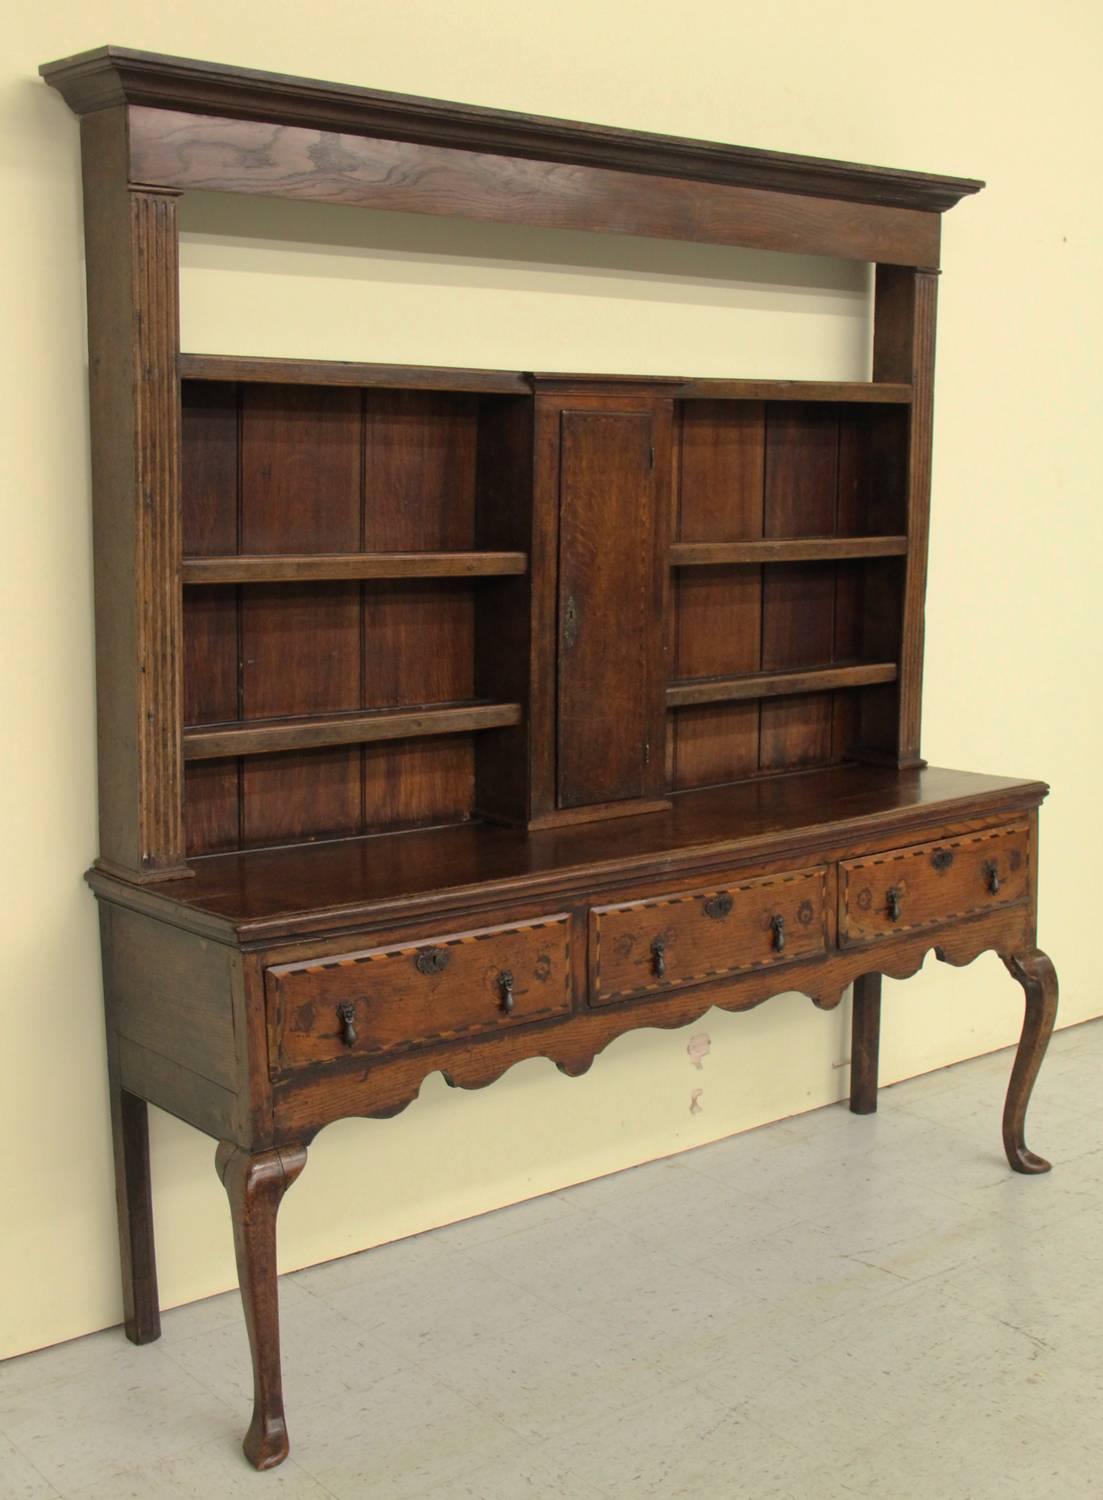 A late 18th century two-part English oak Welsh dresser server or buffet with an exceptional patina from the Georgian period. The upper section has four shelves and a central cupboard door. The lower section has a scalloped apron and three drawers